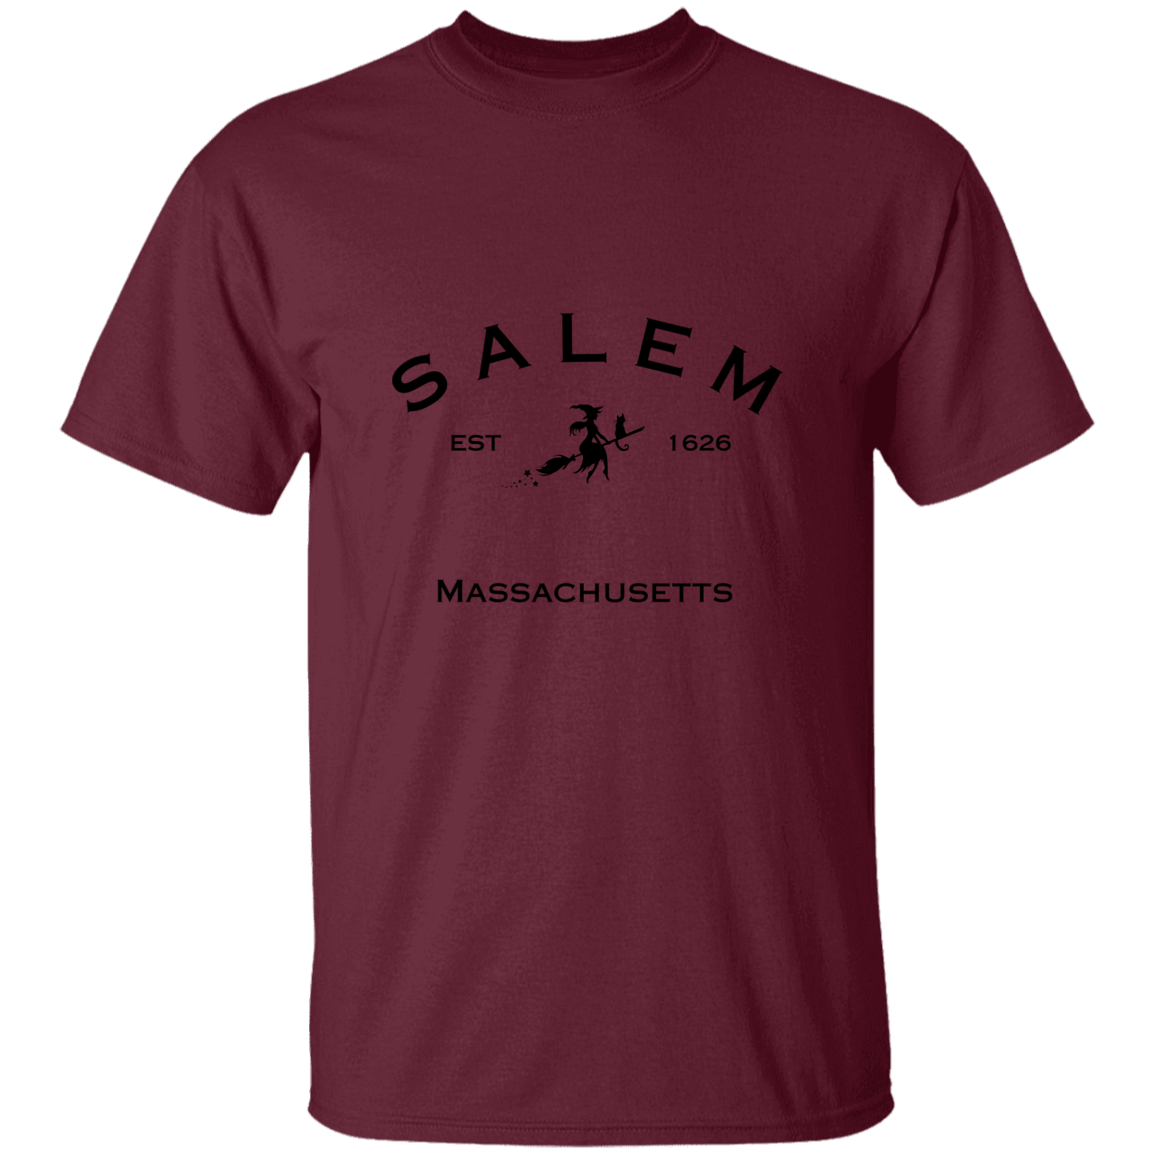 Get trendy with SALEM  Massachusetts 1626 T-Shirt - T-Shirts available at Good Gift Company. Grab yours for $24.95 today!